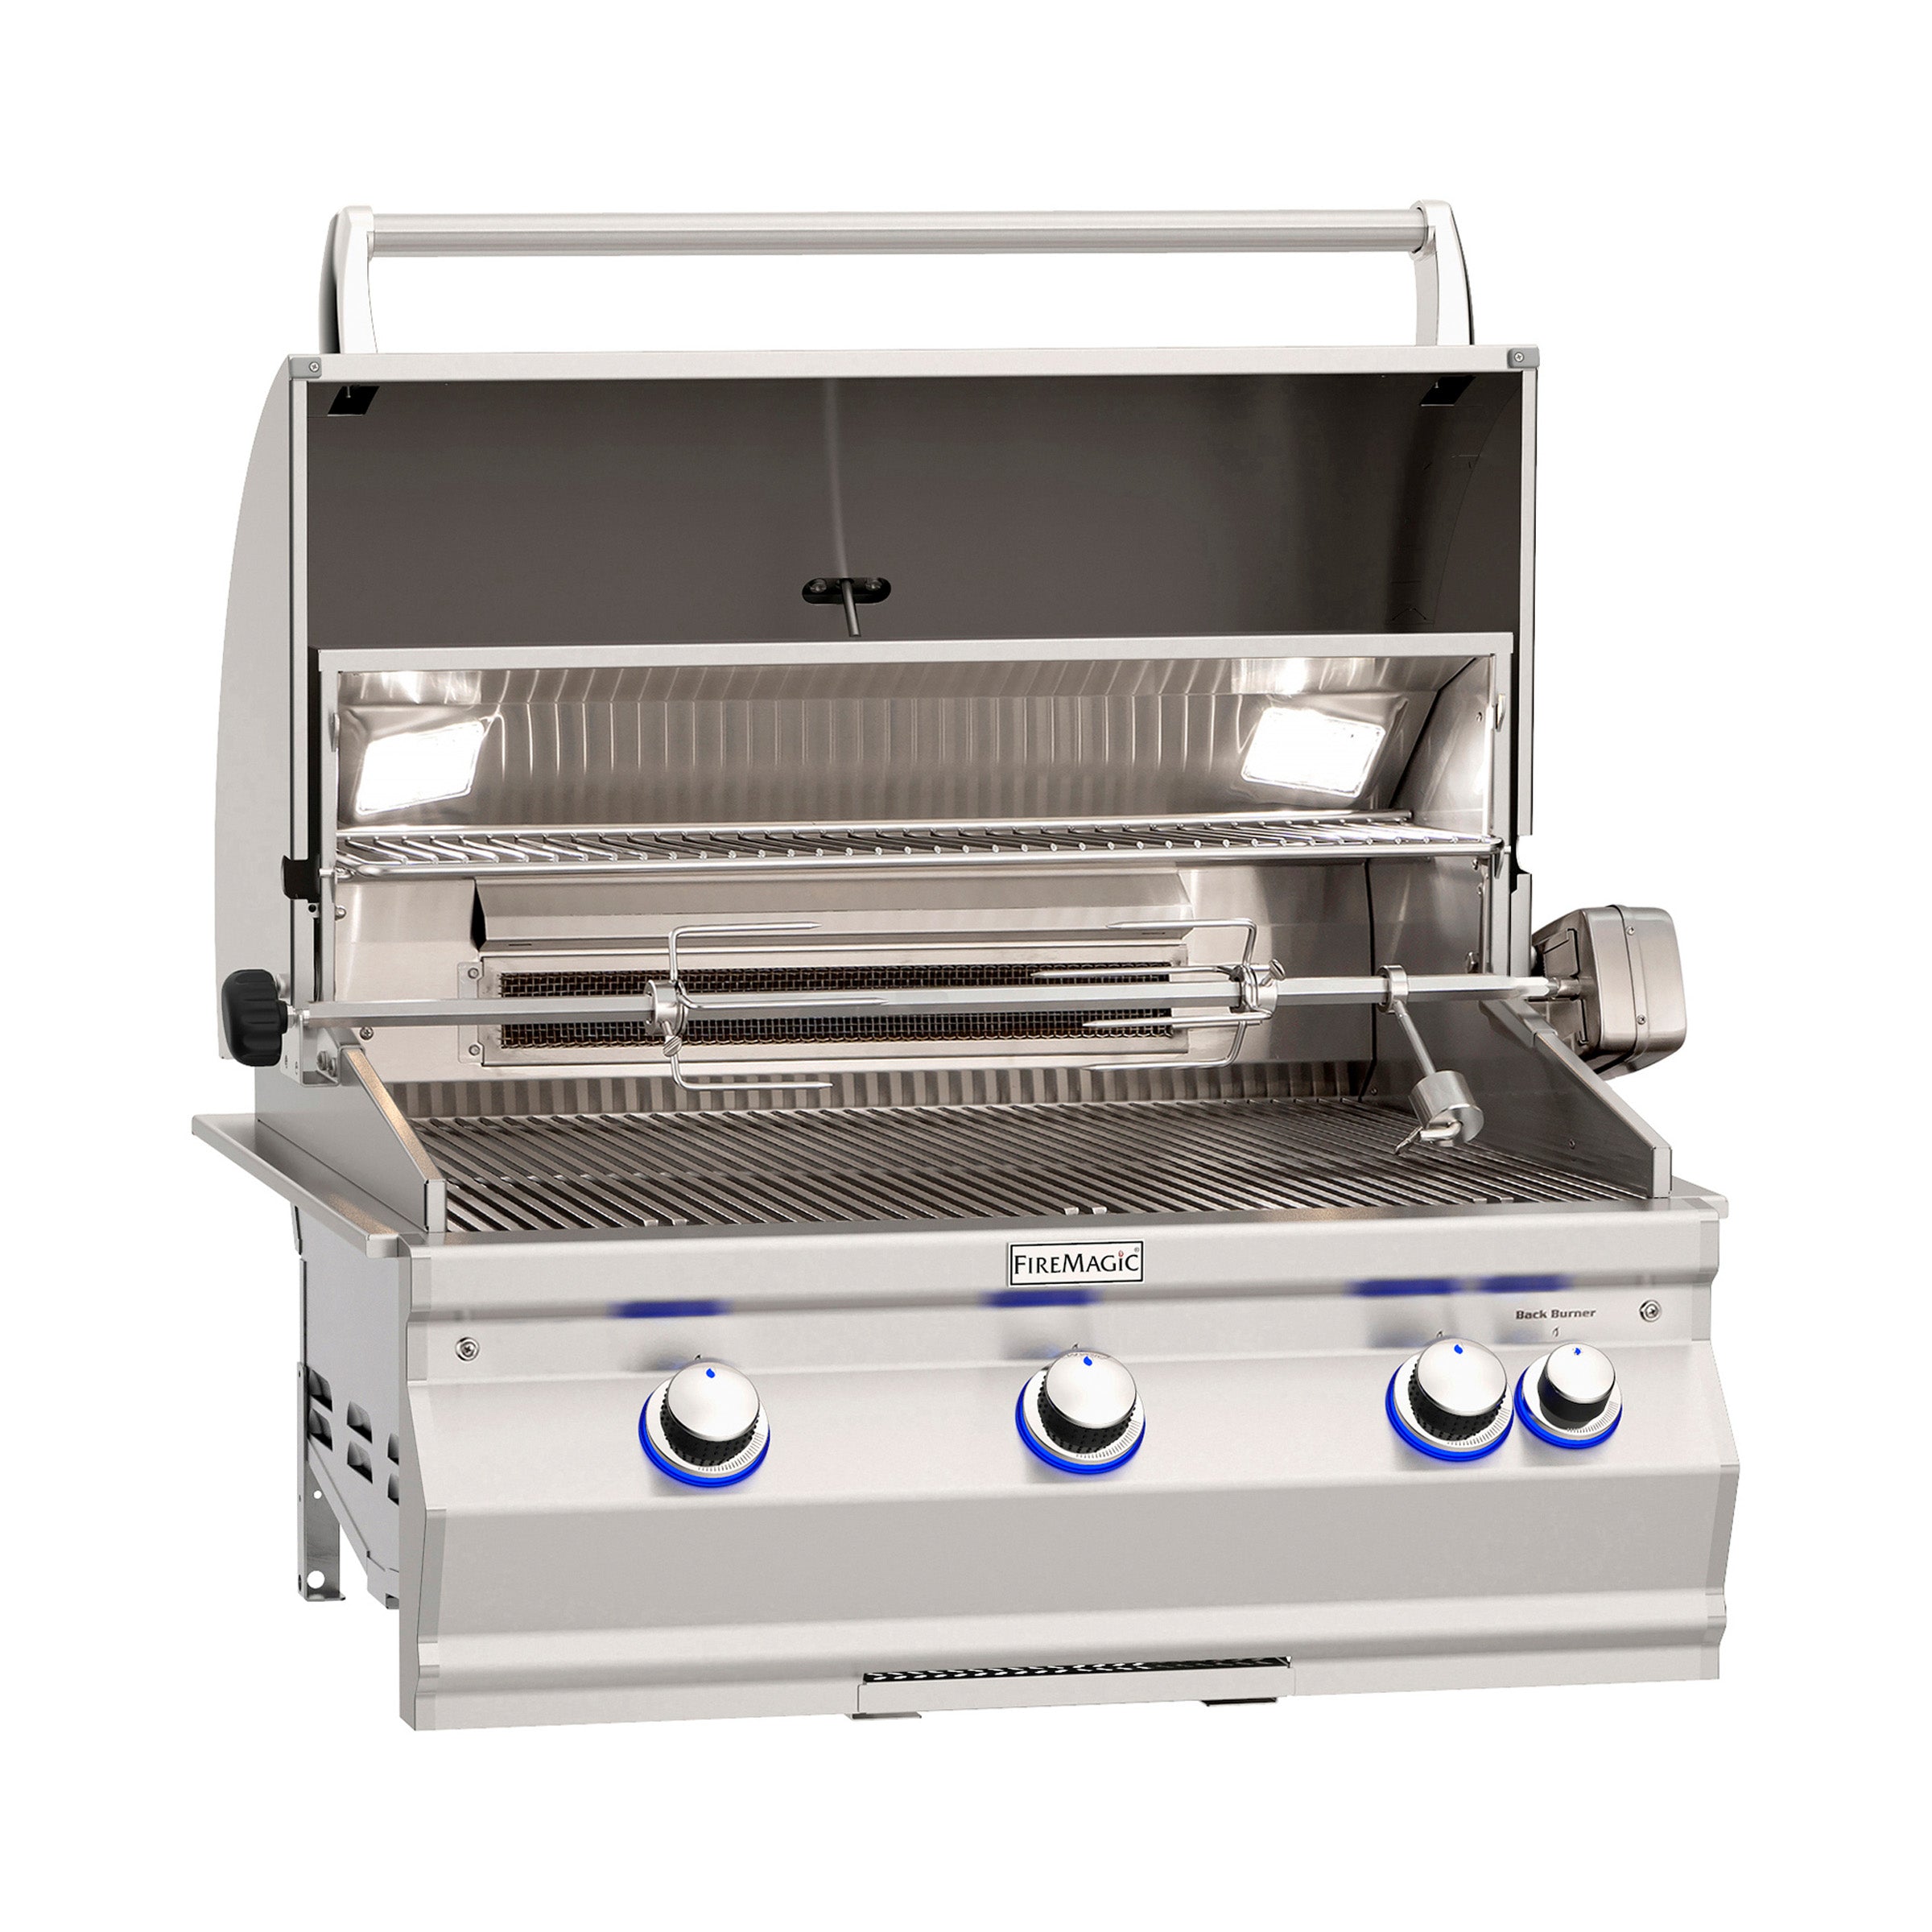 Fire Magic Aurora A660i Built-In Grill without Back Burner